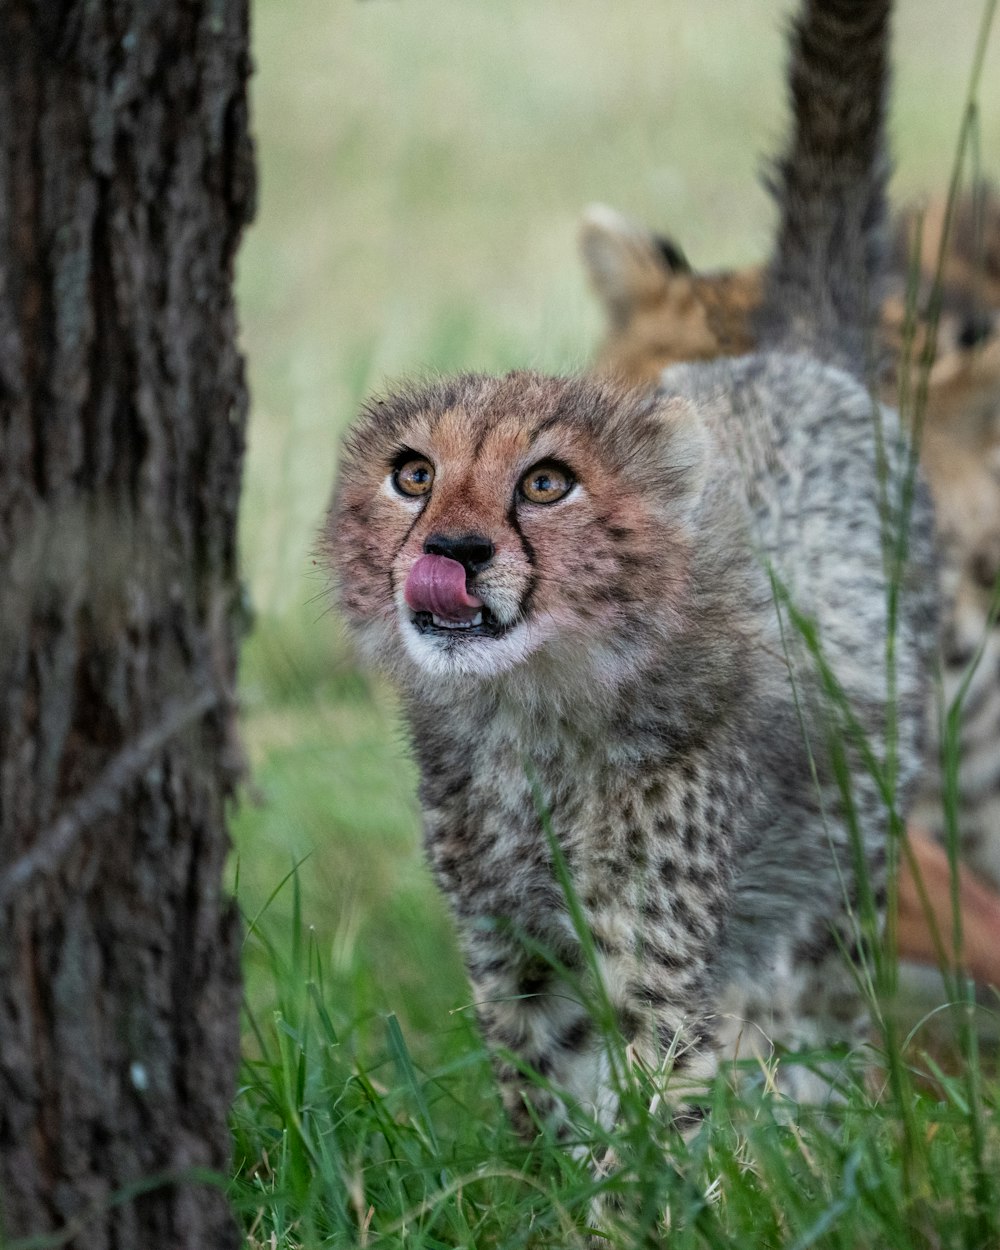 a baby cheetah is sticking its tongue out